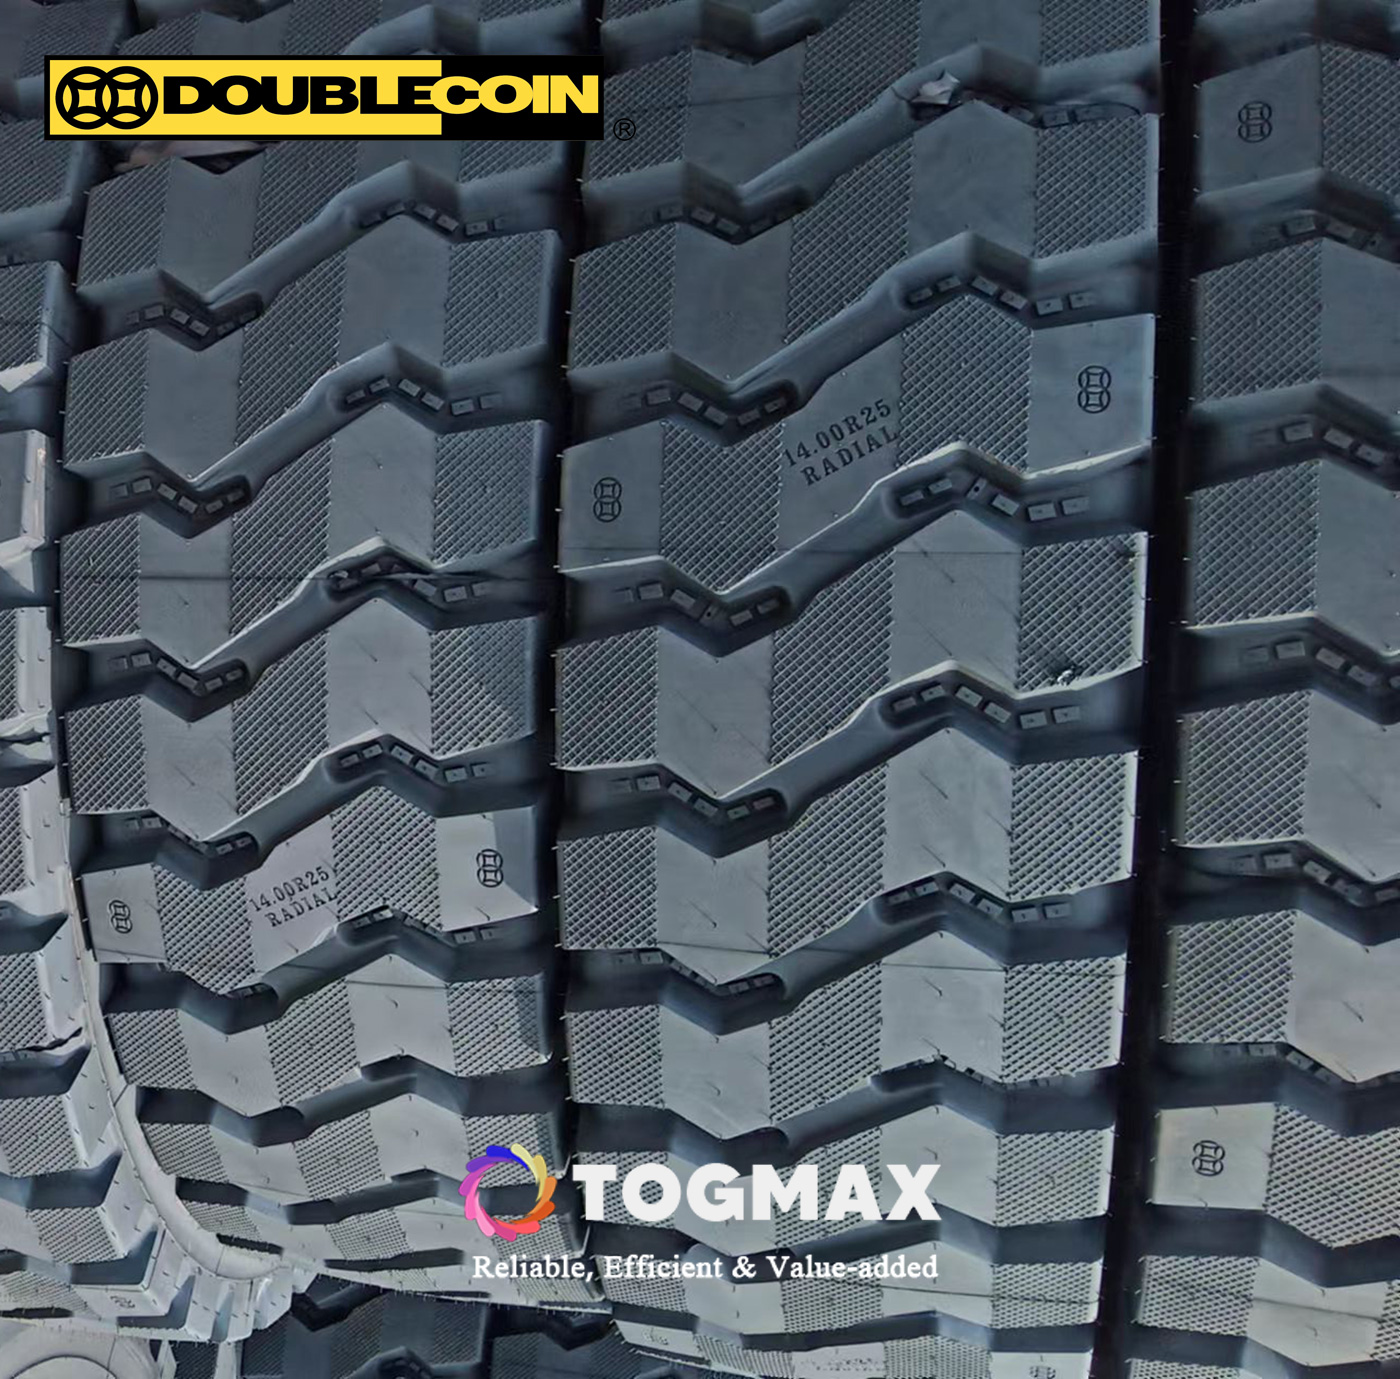 DoubleCoin E3 Mining Tyres DT301 14.00R25, 16.00R25 for Wide Base Dump Trucks by Togmax Group